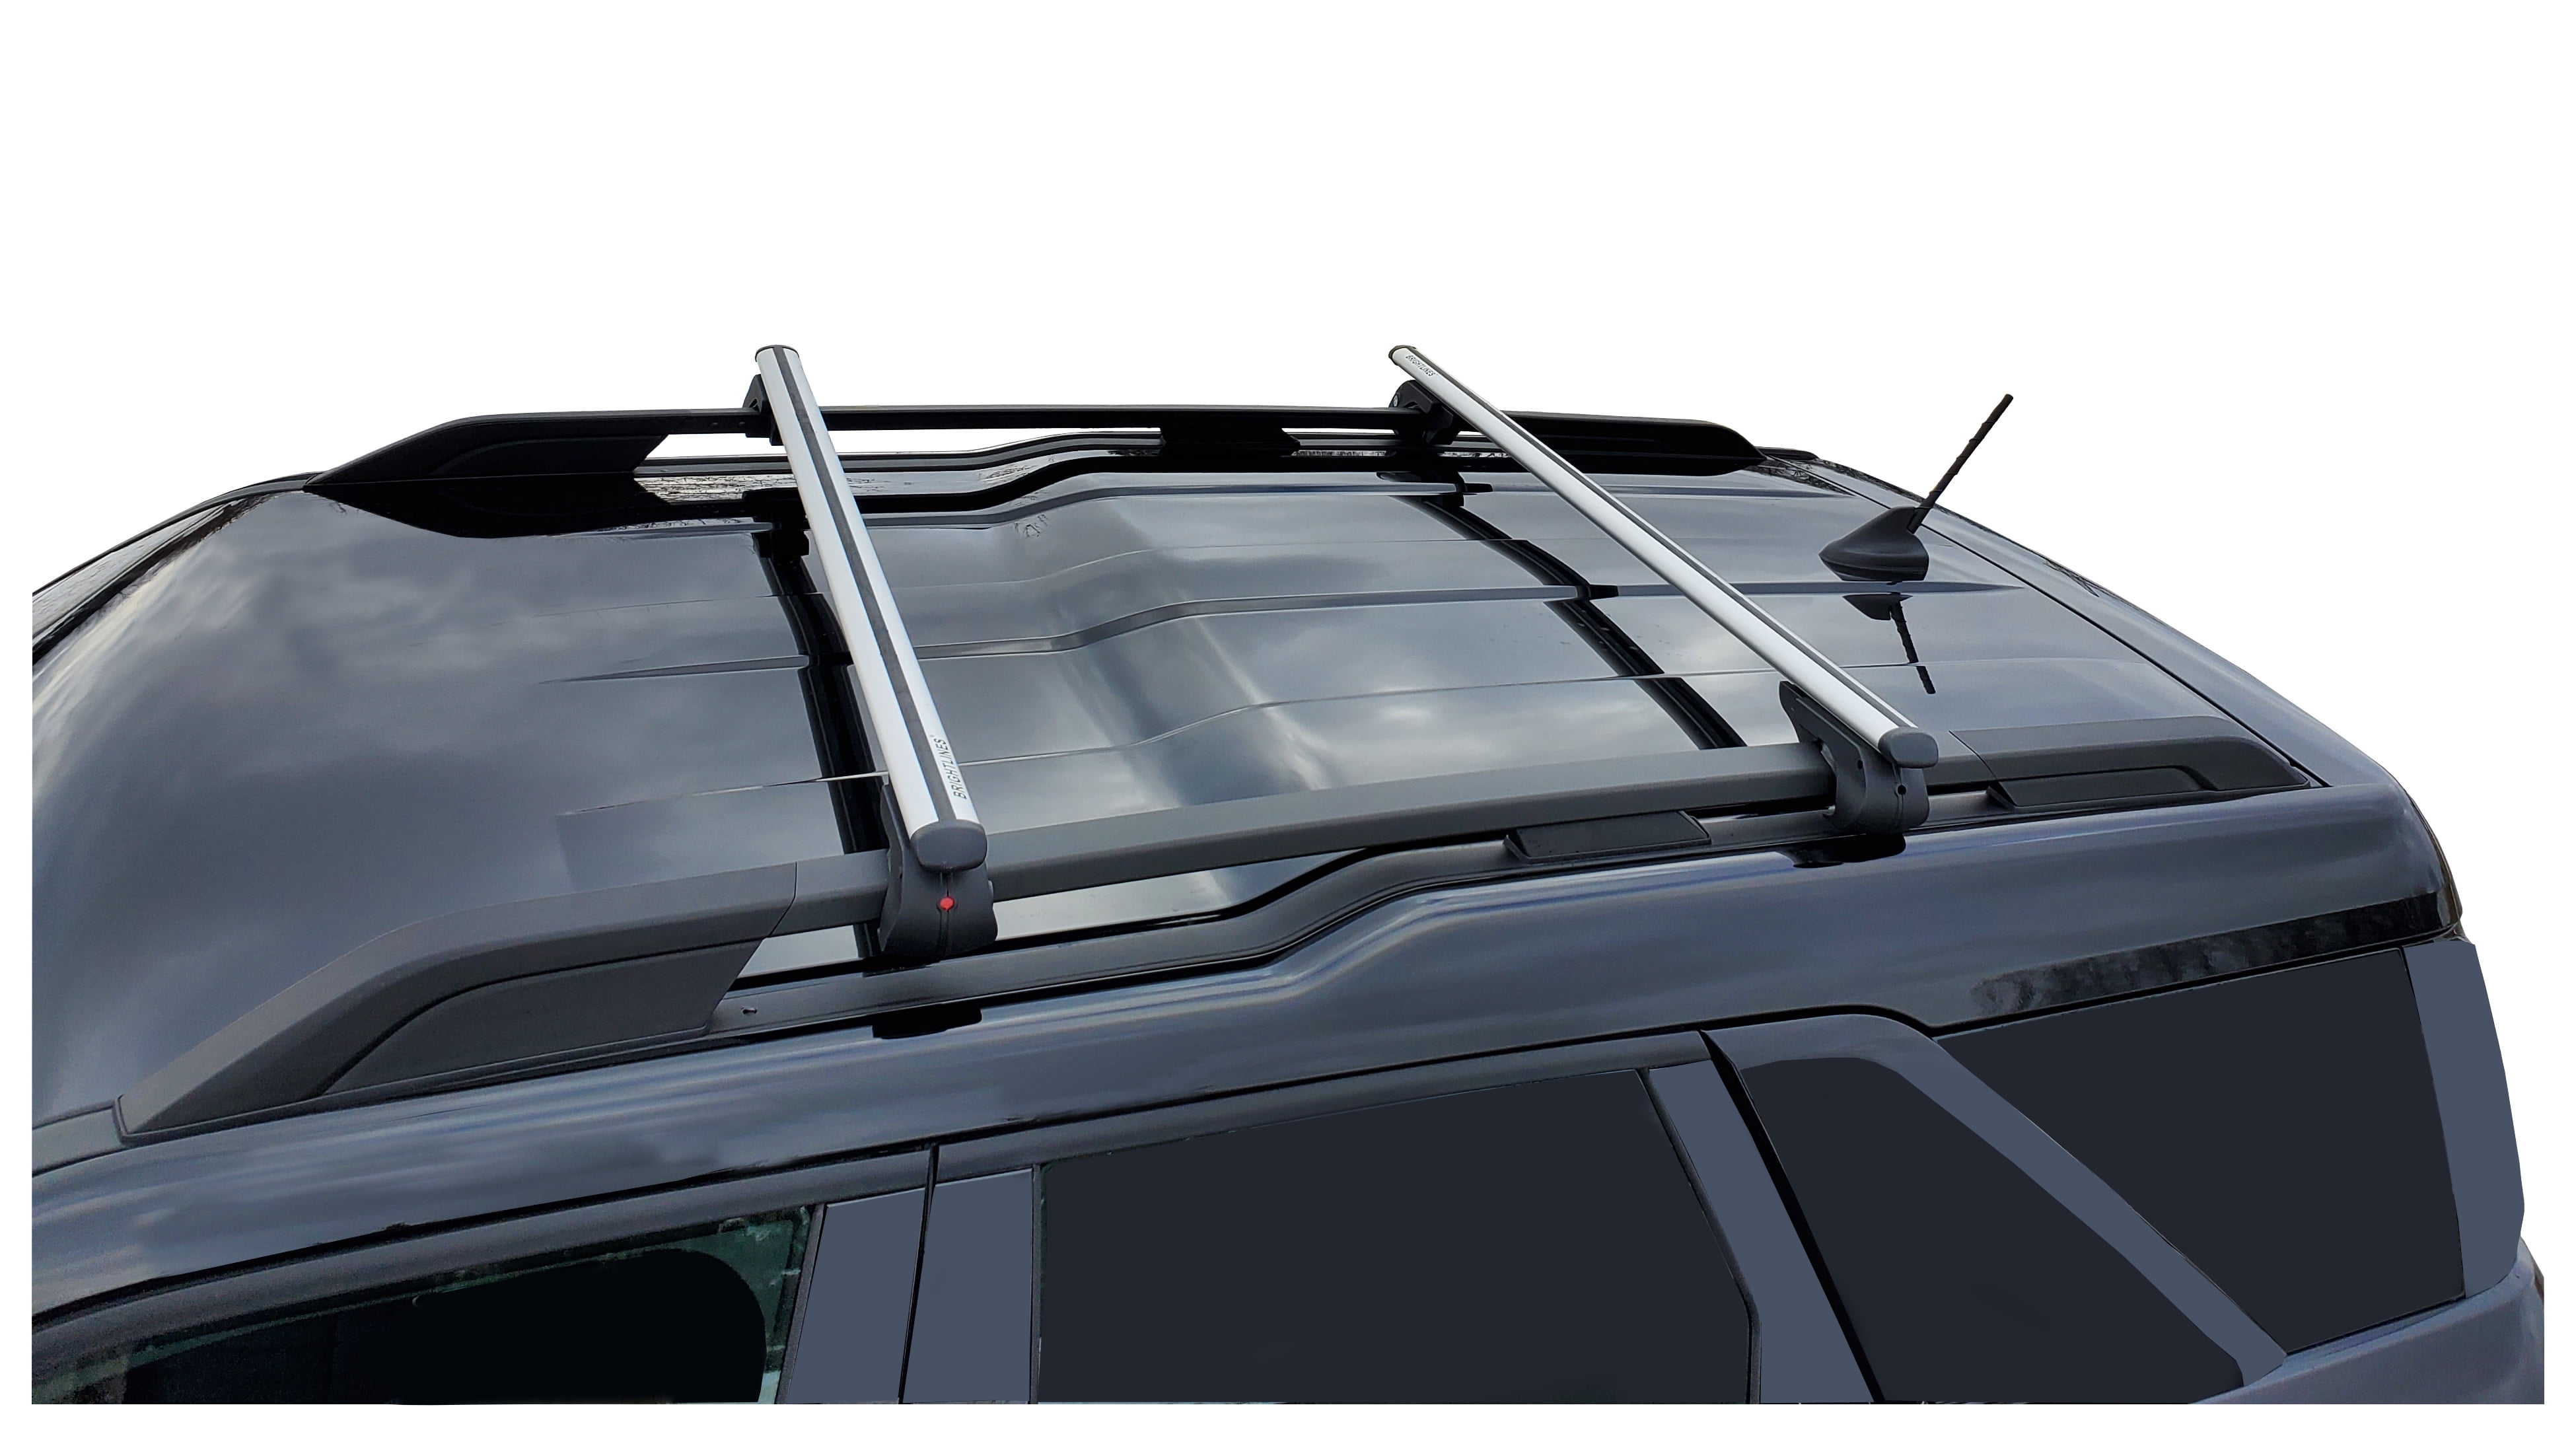 AUXPACBO Cross Bars Fits for Ford Bronco Sport First Edition 2021 & Outer-Banks 2022 & Badlands 2021-2022 Off-Road Adjustable Roof Rack Crossbar Luggage Rack Cargo Carrier 2Pcs 